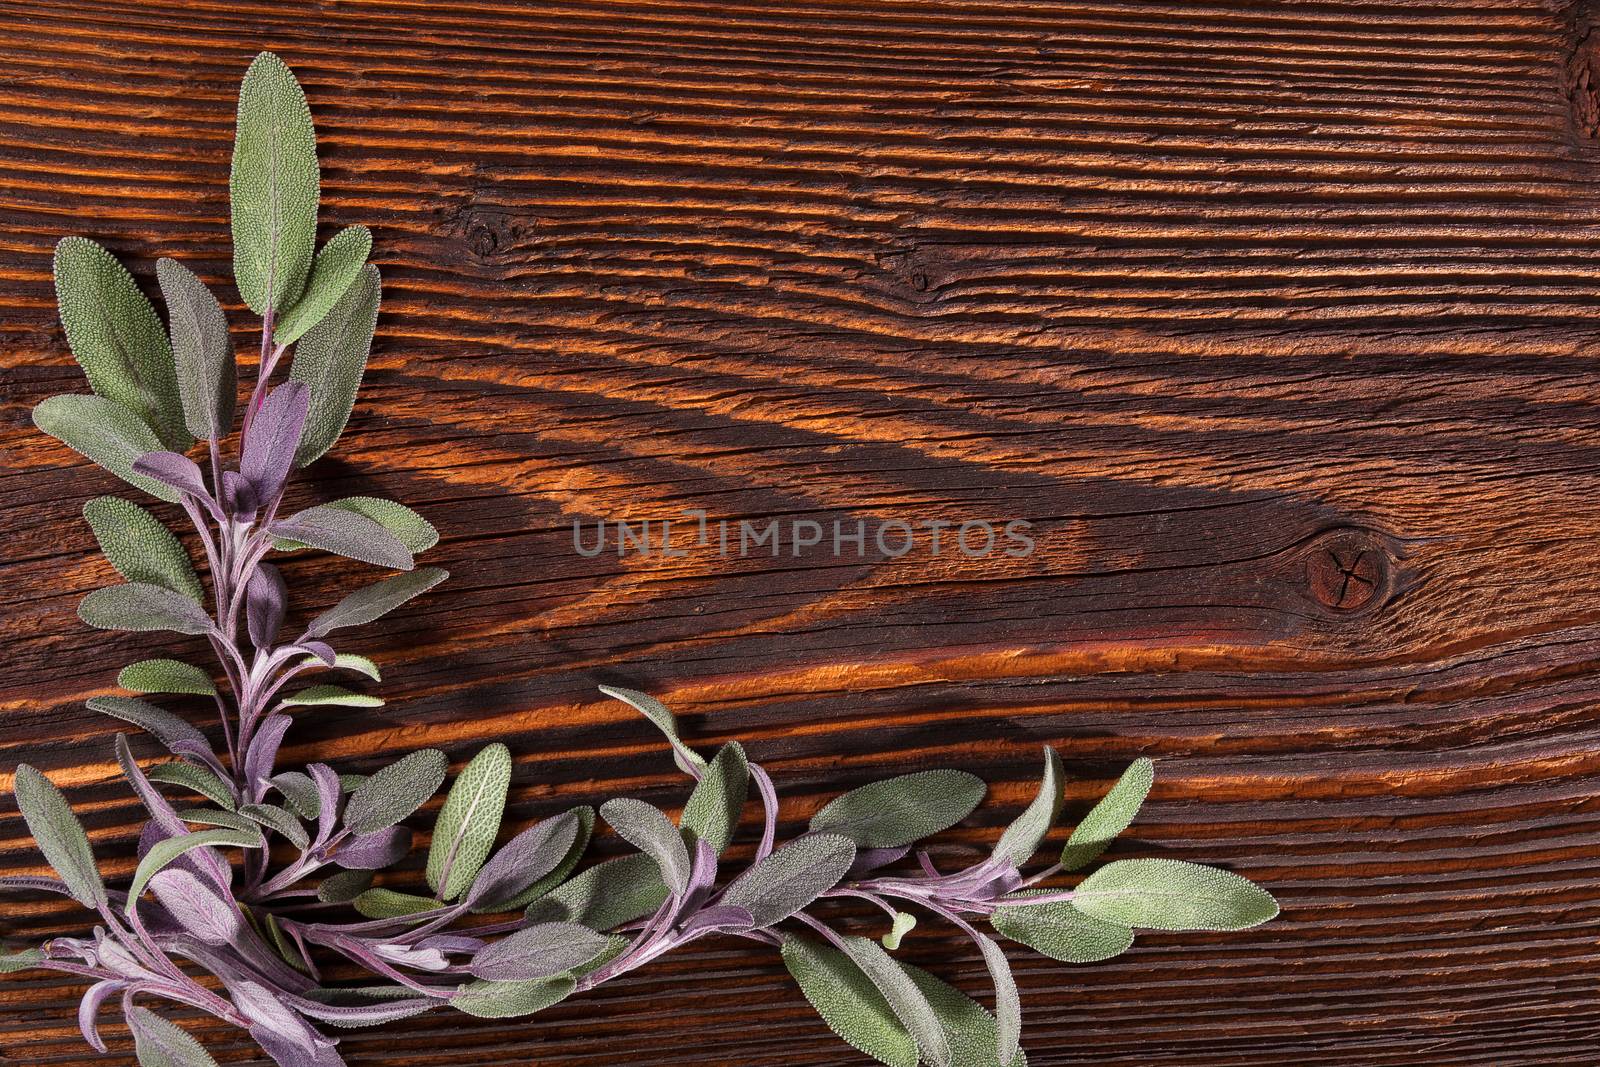 Sage herb on brown wooden rustic background with copy space. Alternative herbal medicine background with copy space.